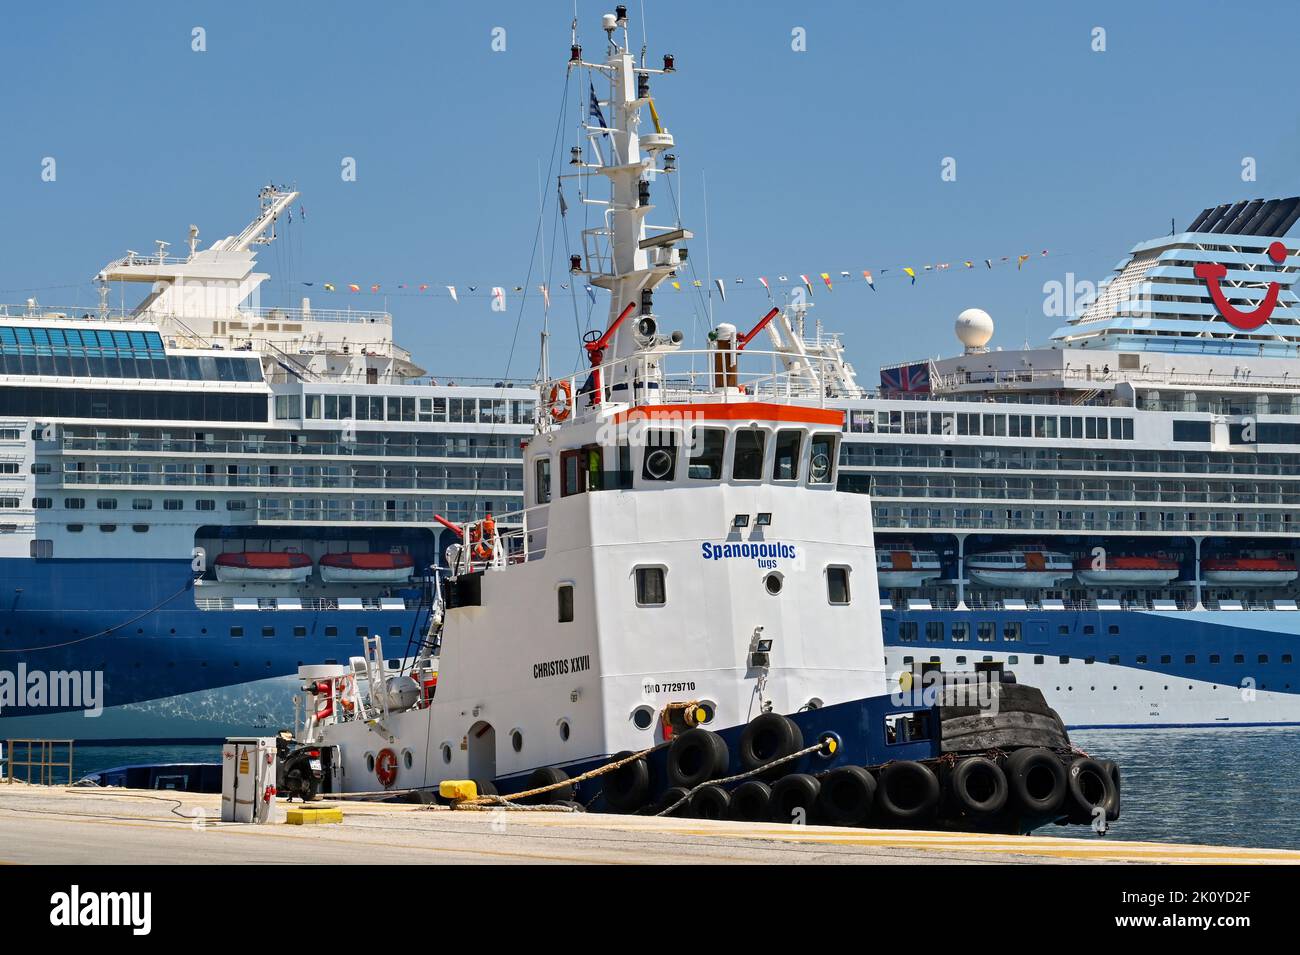 Corfu, Greece - June 2022: Firefighting tug moored in the port of Corfu with a cruise ship in the background Stock Photo